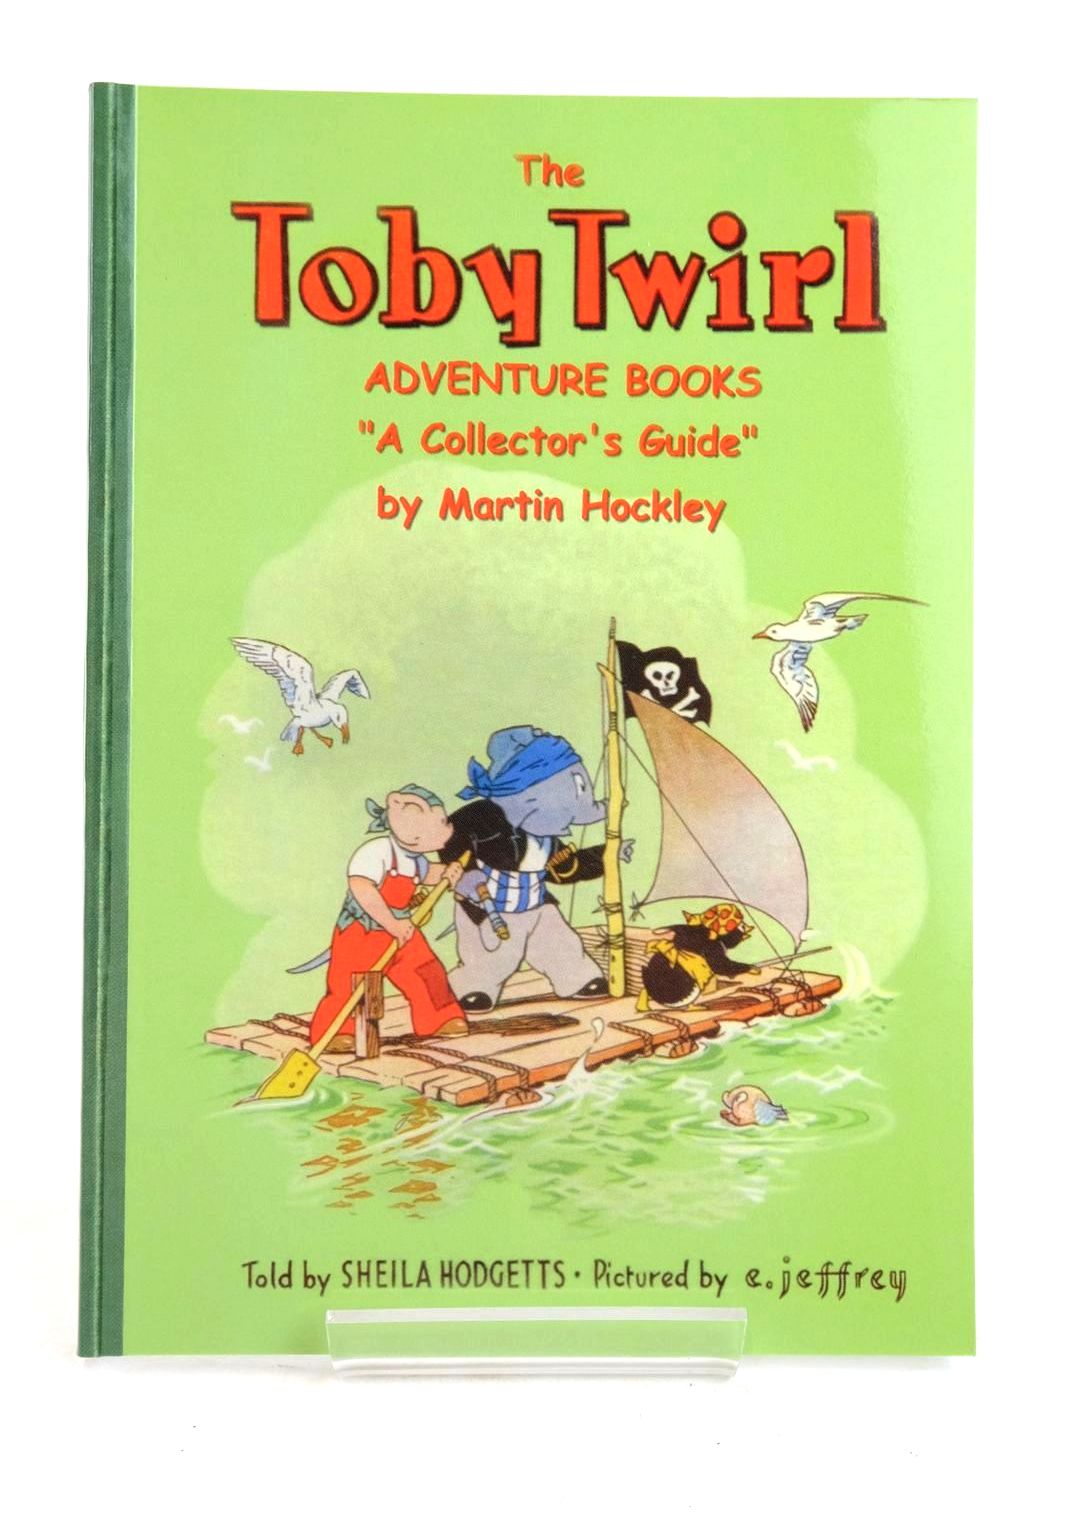 Photo of THE TOBY TWIRL ADVENTURE BOOKS A COLLECTOR'S GUIDE written by Hodgetts, Sheila Hockley, Martin illustrated by Jeffrey, E. published by Toby Twirl Ltd. (STOCK CODE: 1319643)  for sale by Stella & Rose's Books